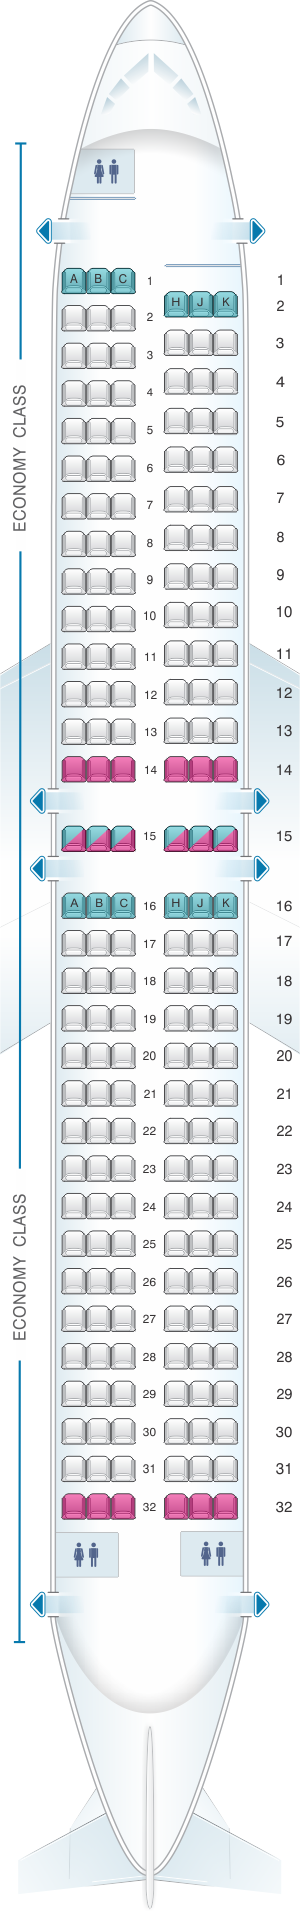 Seat map for Air Transat Boeing 737-800 US and South